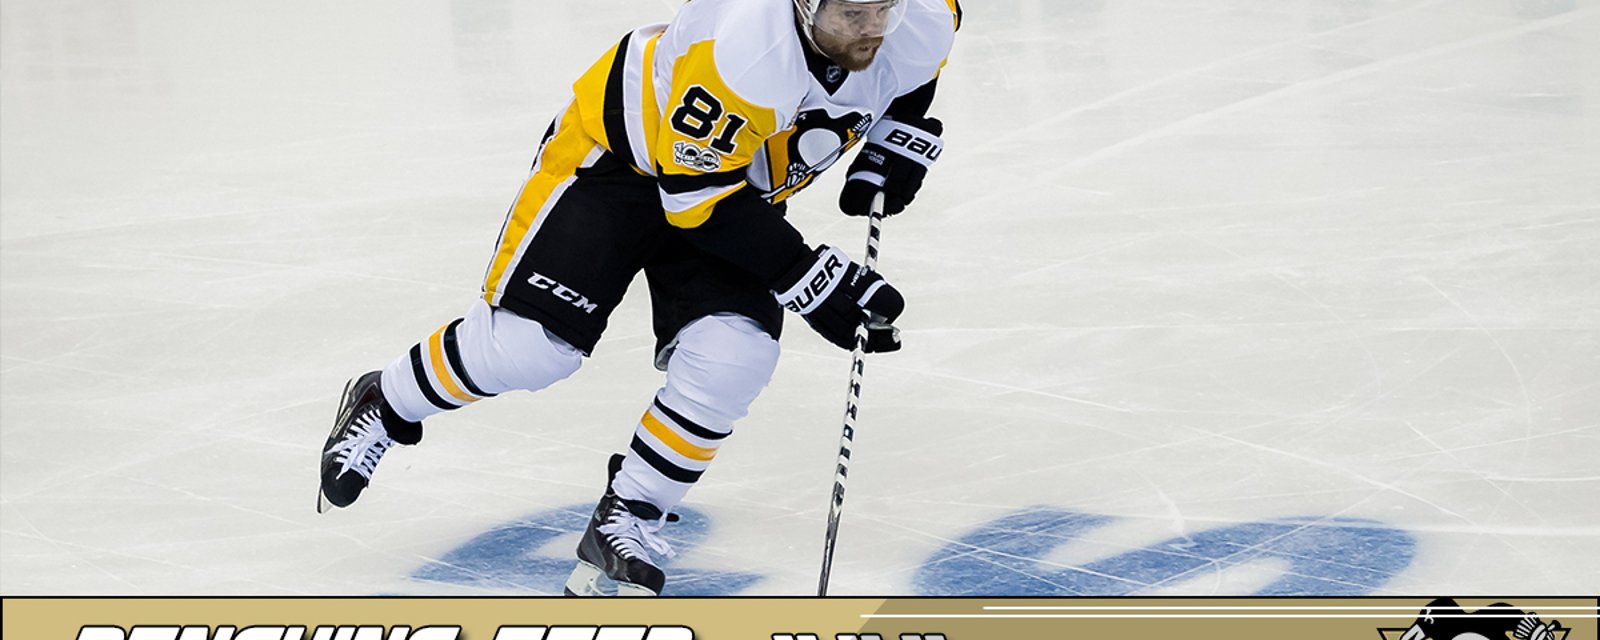 Kessel leading the way for Pens